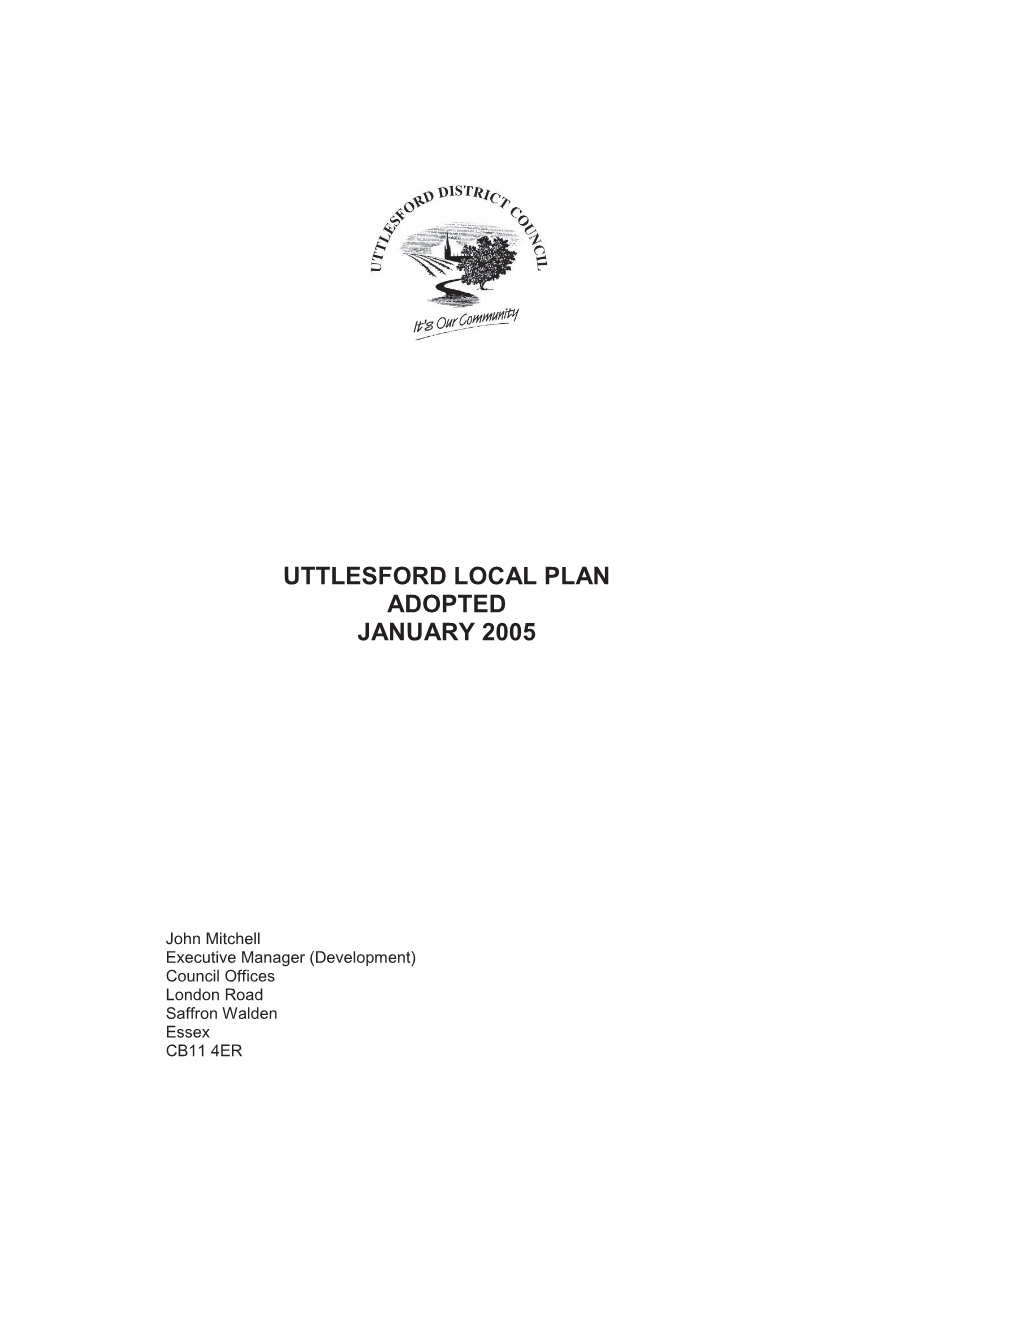 Uttlesford Local Plan Adopted January 2005